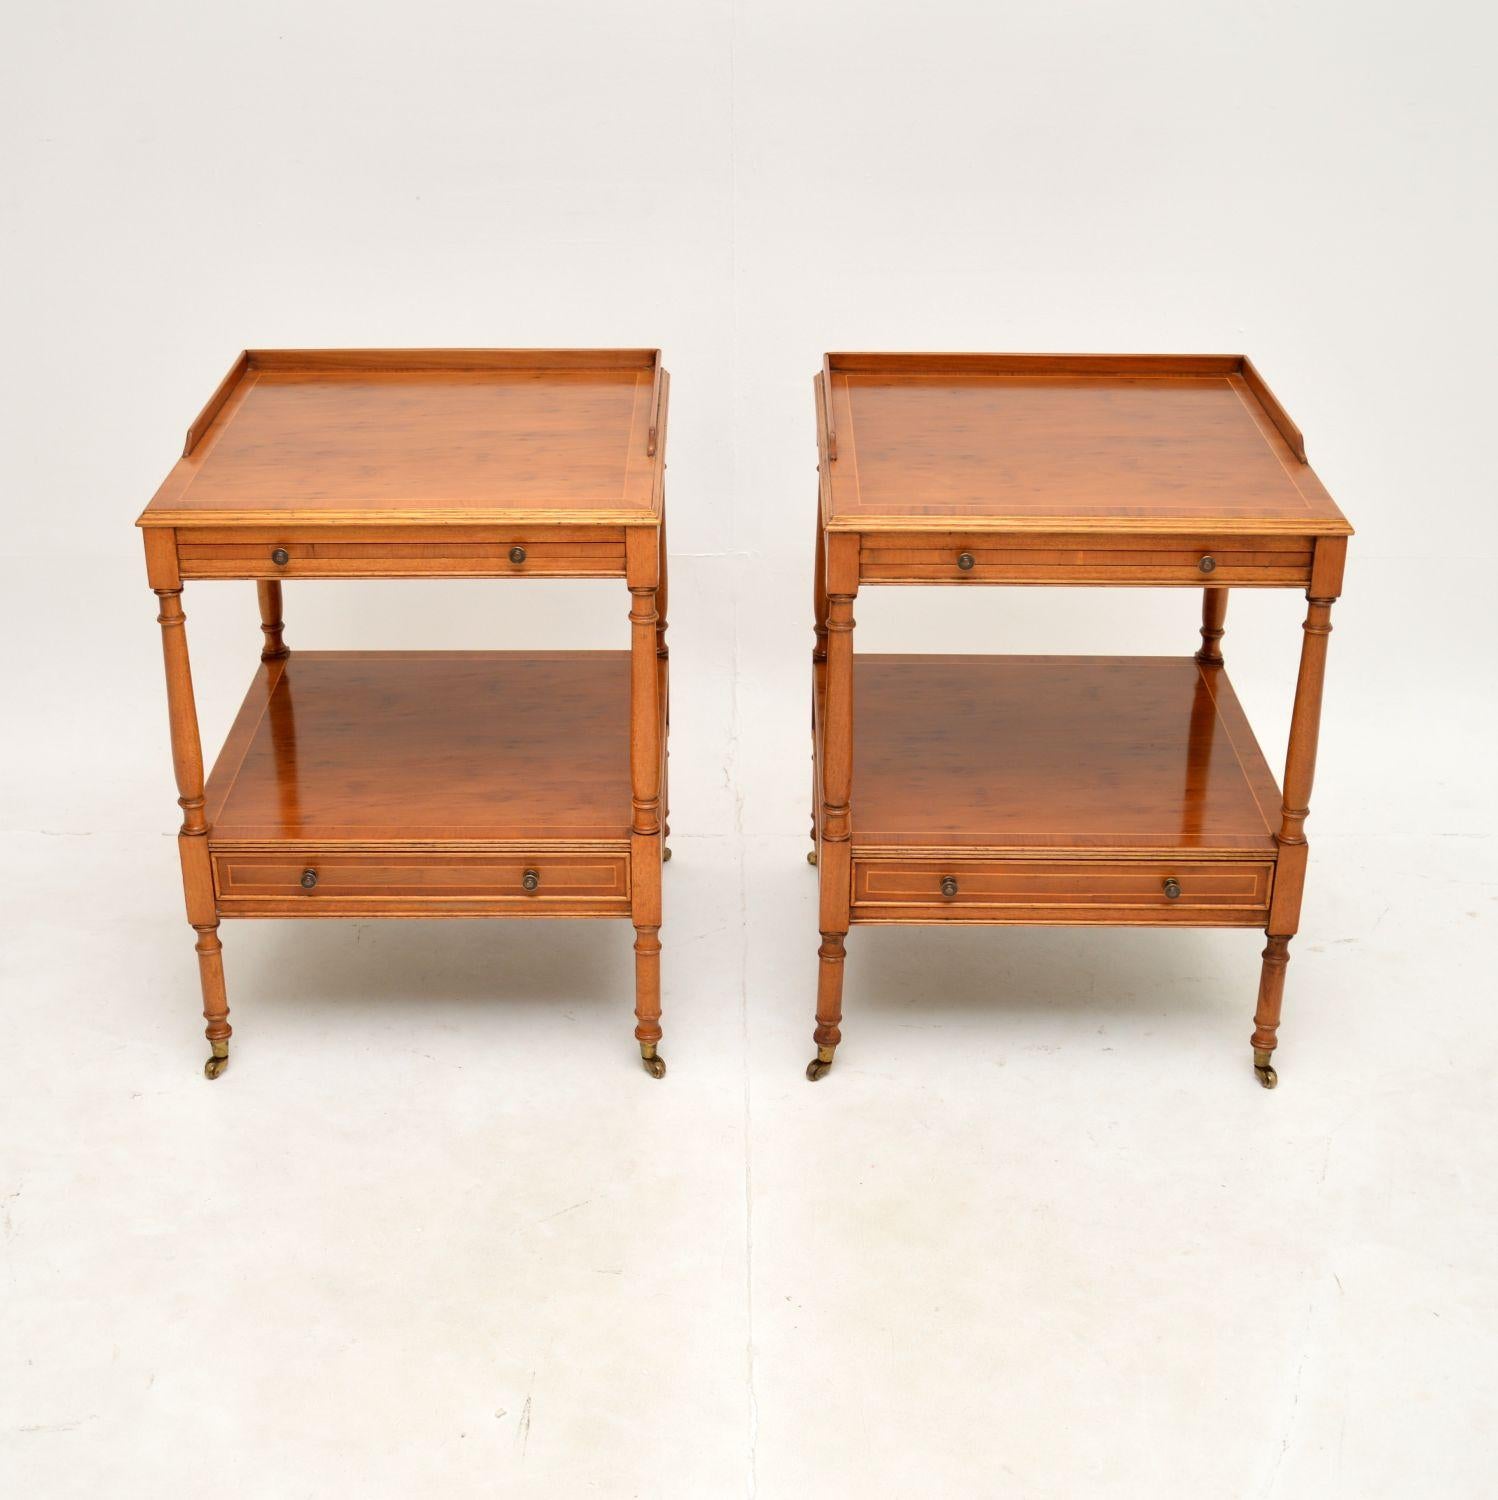 A fantastic pair of antique Georgian style side tables in yew wood. They were made in England, and date from around the 1950’s.

The quality is great, they are very well made with solid oak construction beneath the yew wood, and fine hand cut